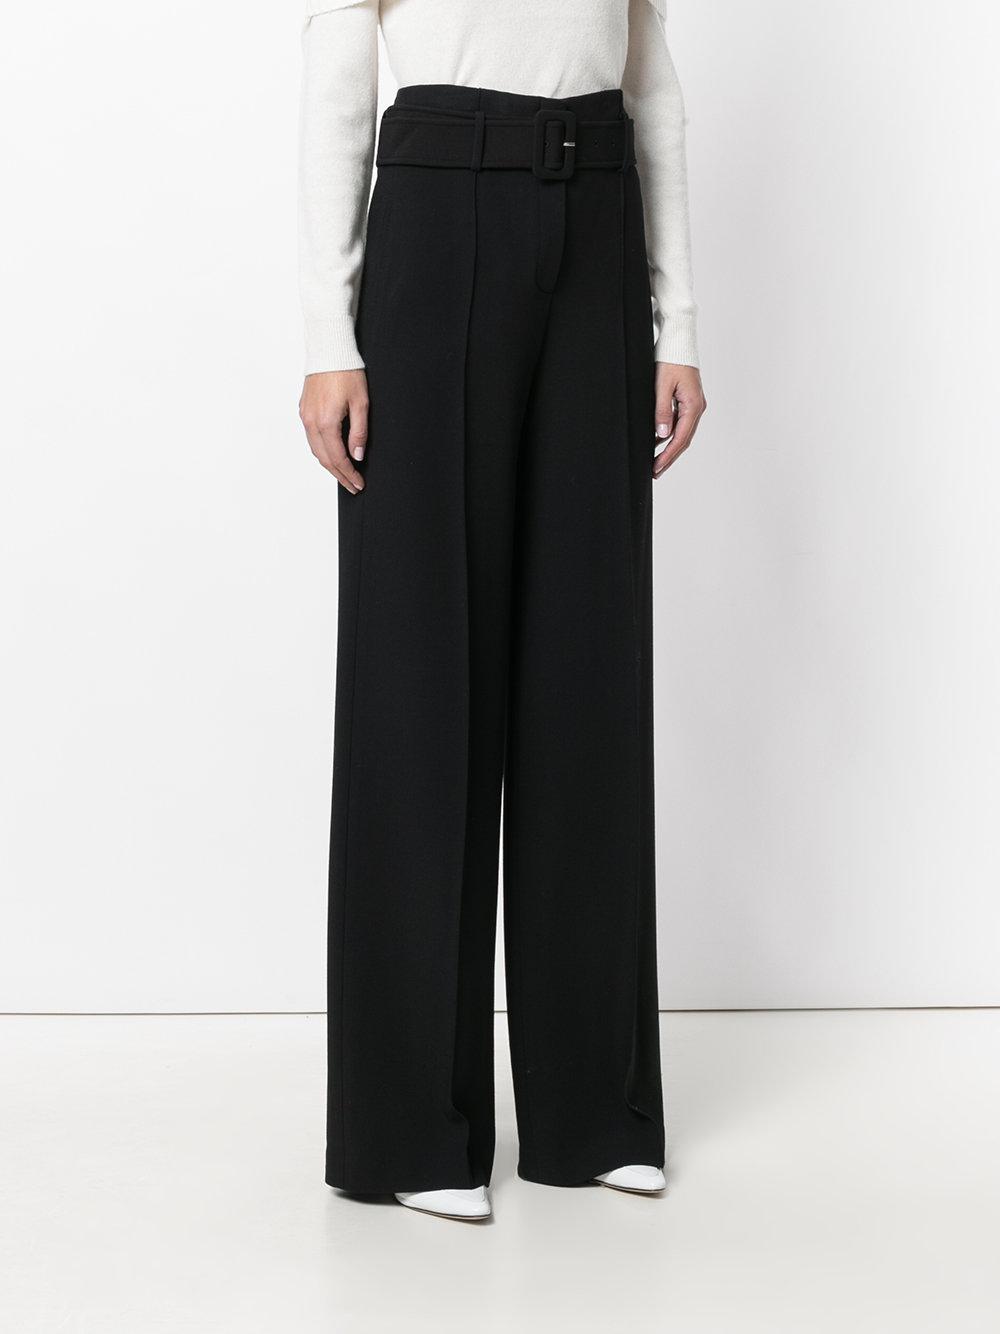 Theory Wool Belted Stretch High Waist Trousers in Black - Lyst